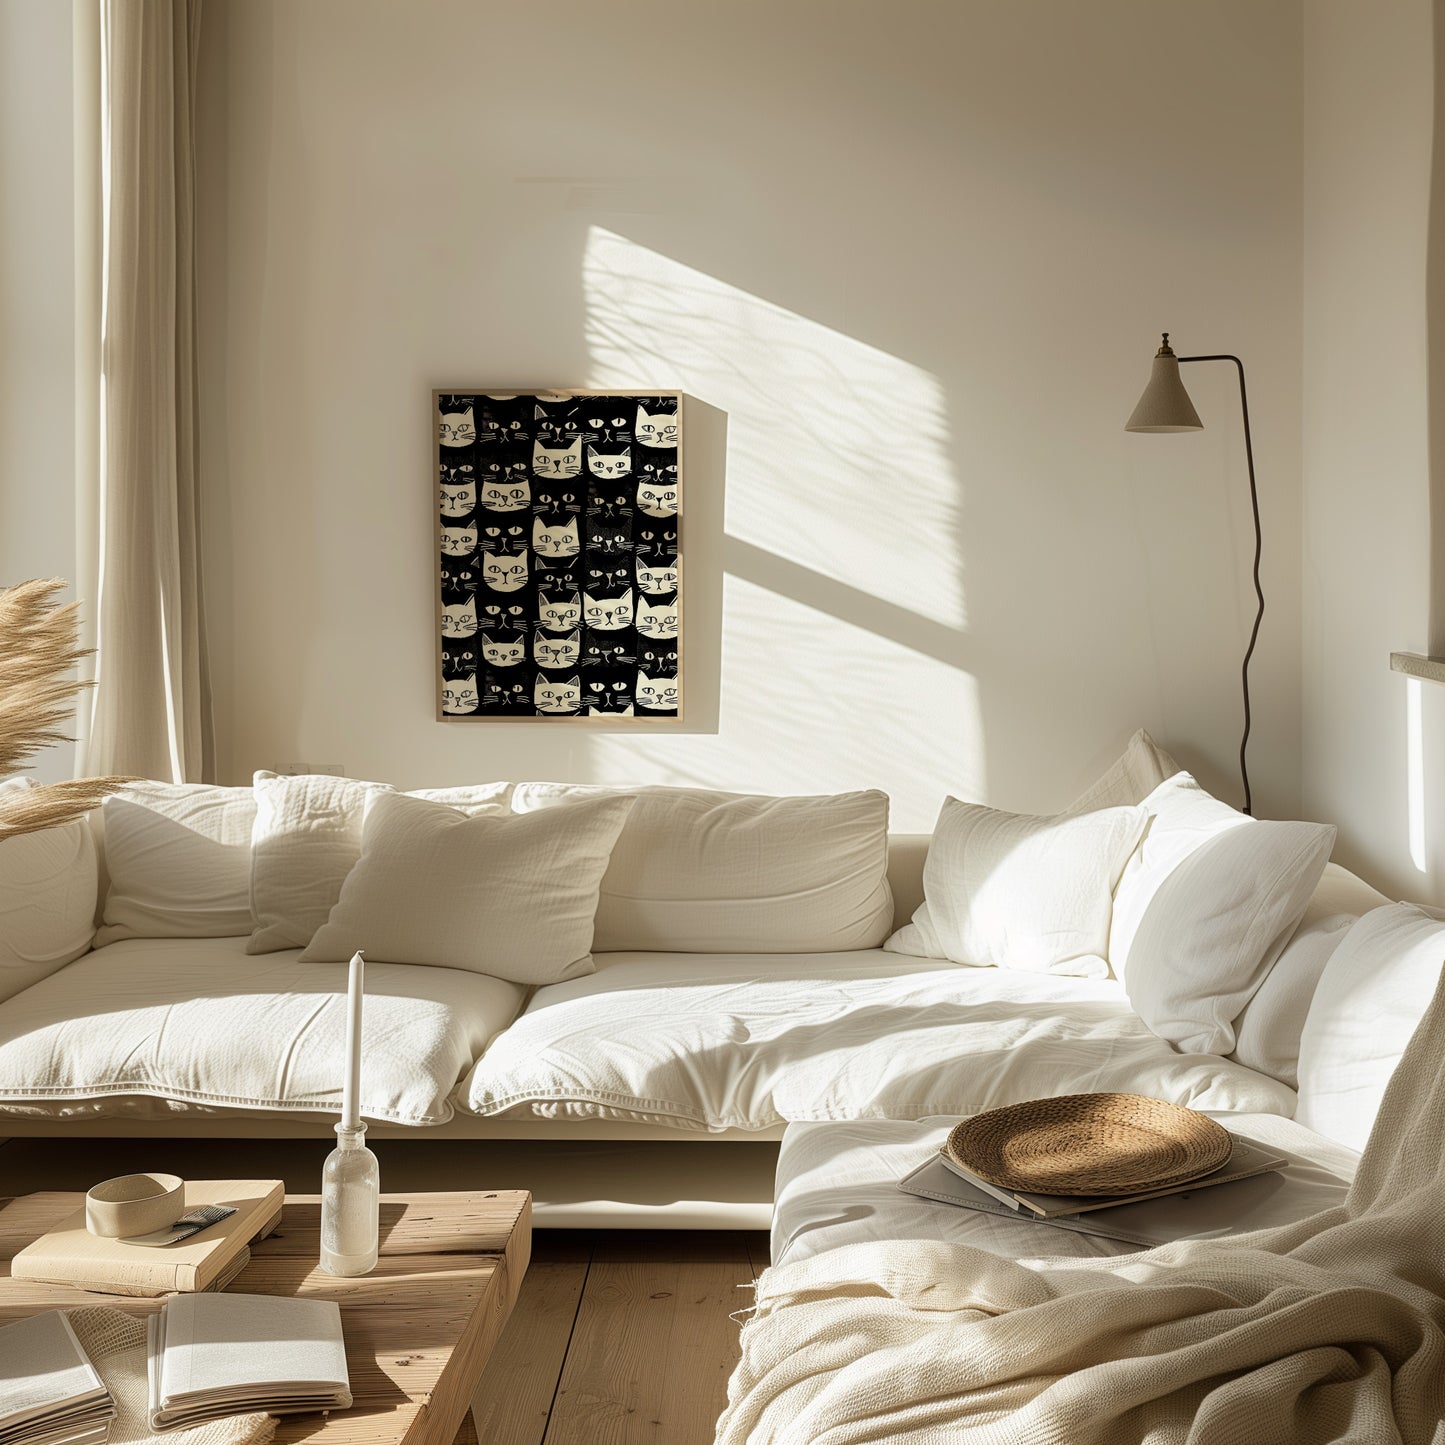 Sunny minimalistic living room with a white sofa, wooden floor, and wall art.